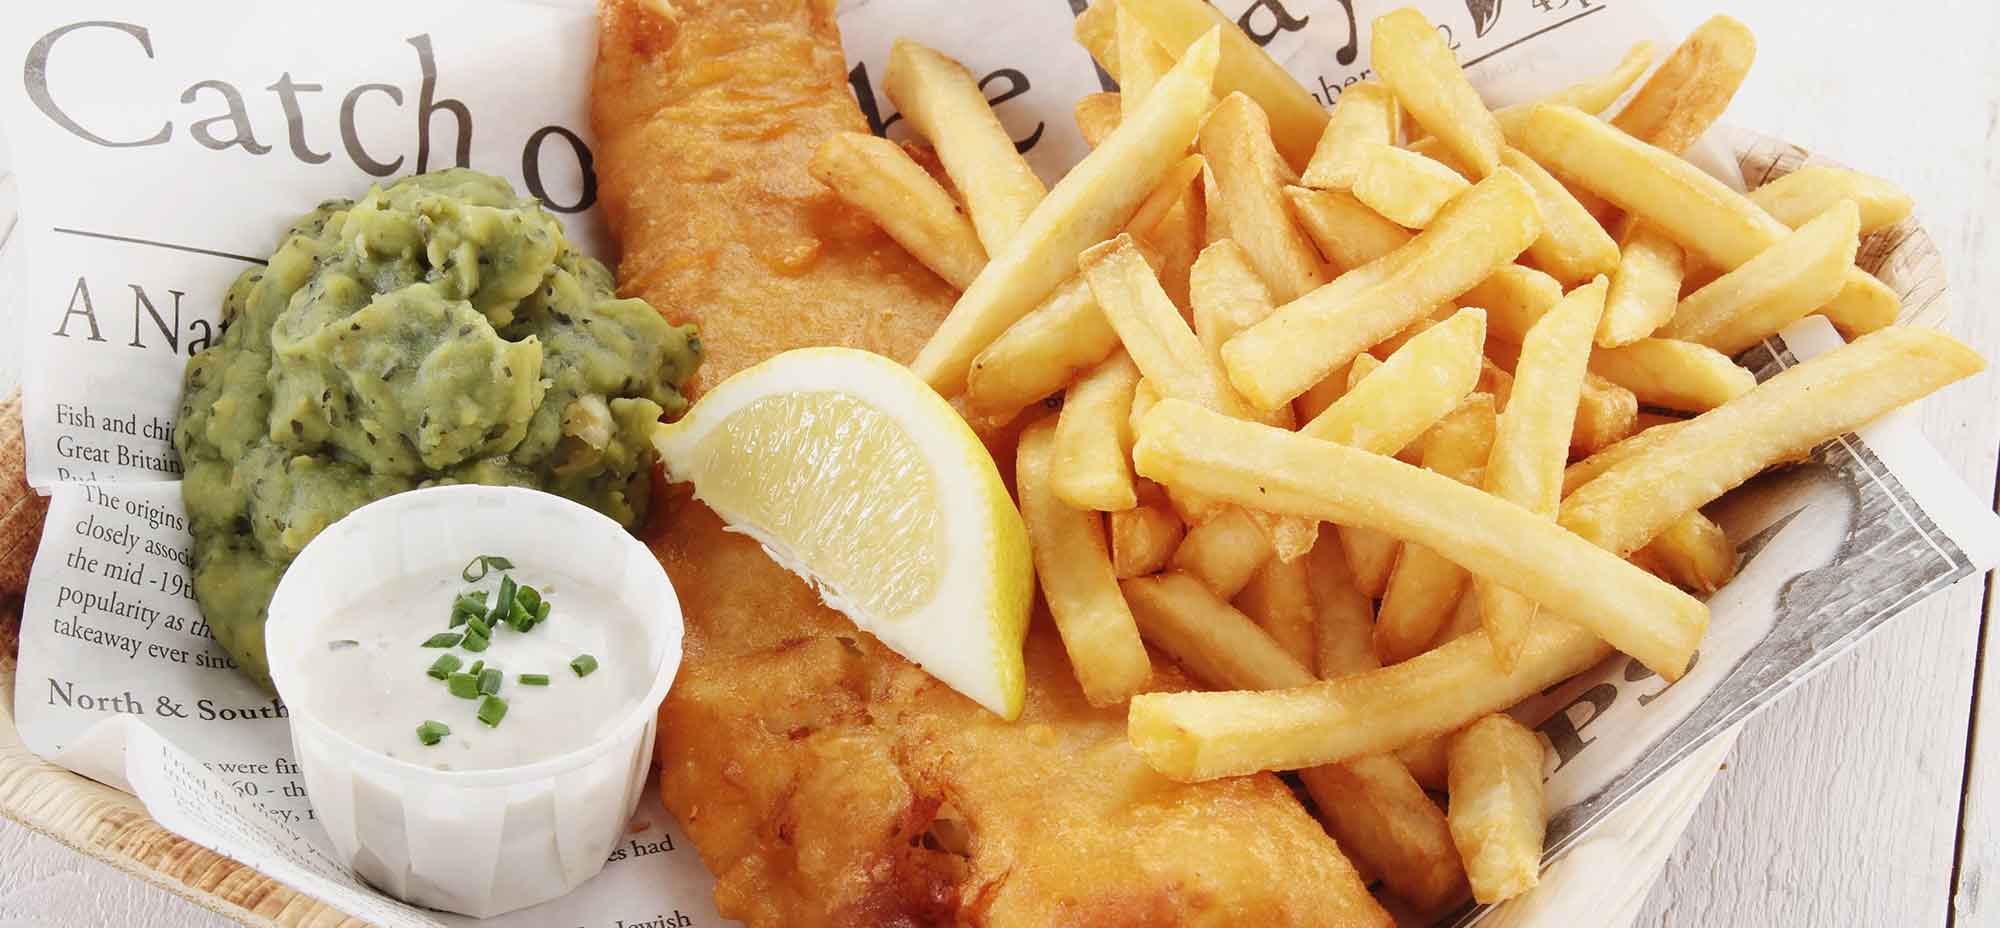 Photo shows perfectly deep fried fish and chips